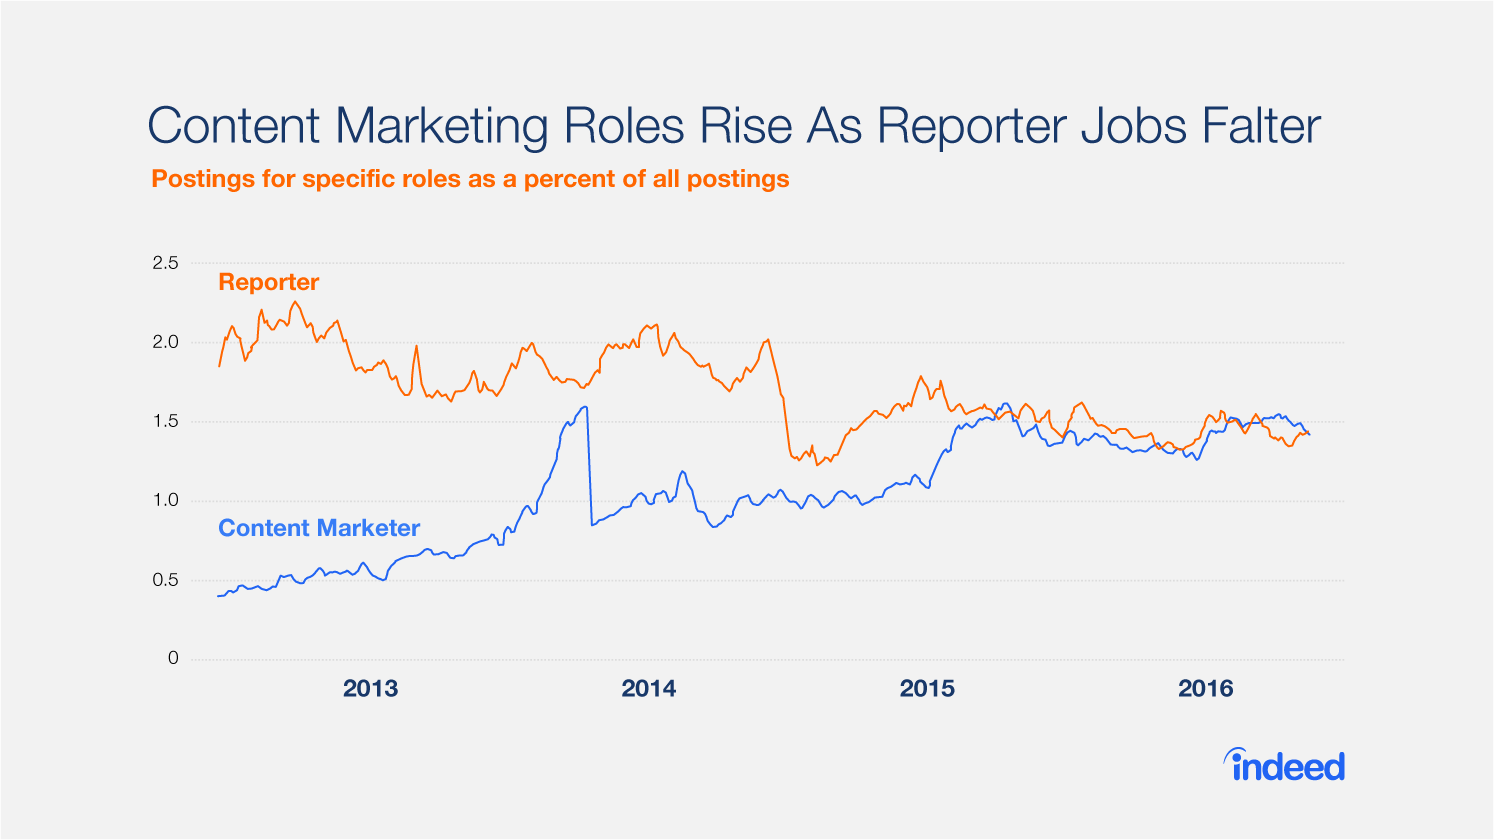 Content Marketing Roles Rise As Reporter Jobs Falter